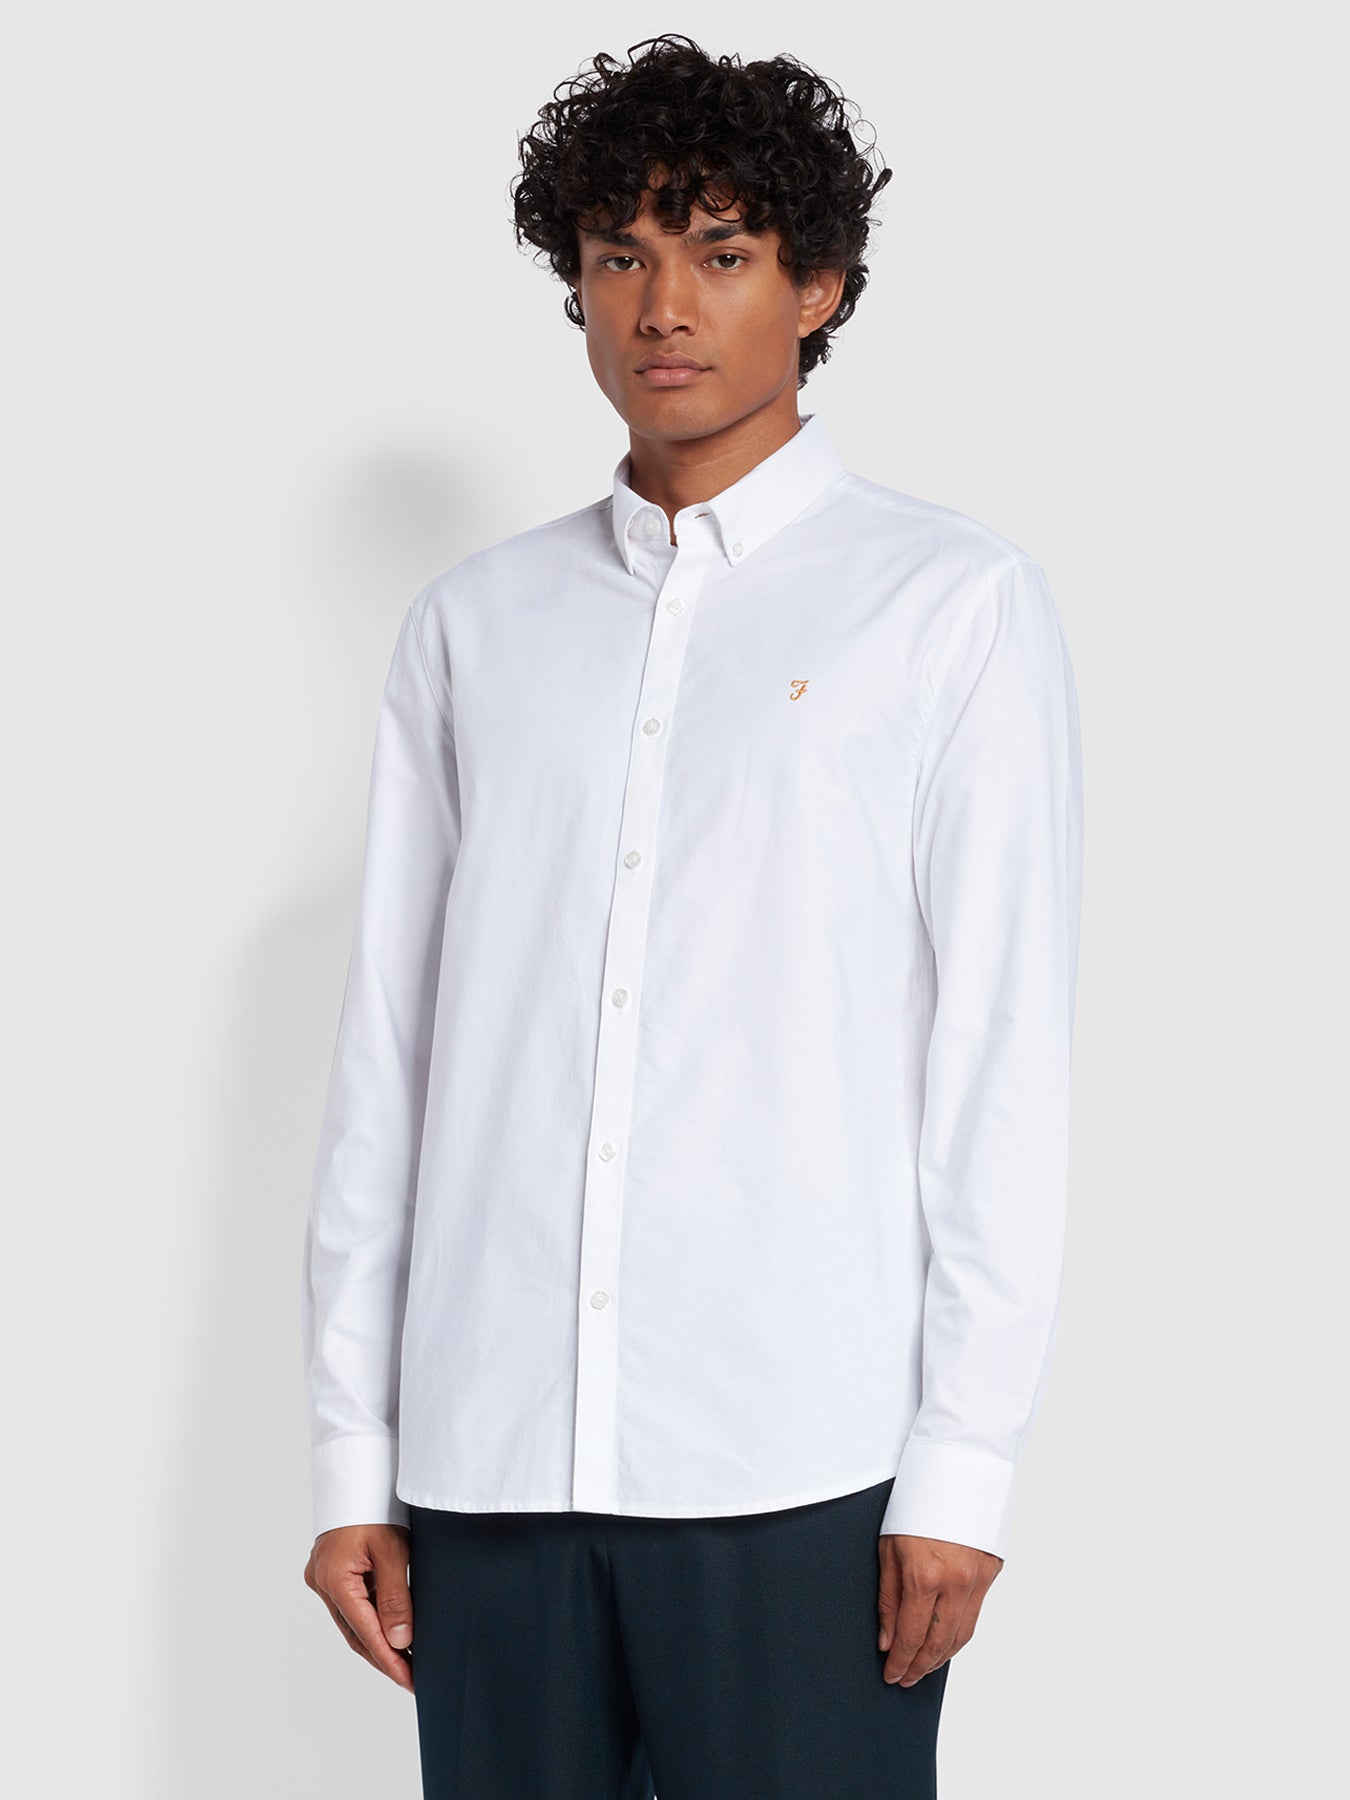 View Brewer Casual Fit Long Sleeve Organic Cotton Oxford Shirt In White information